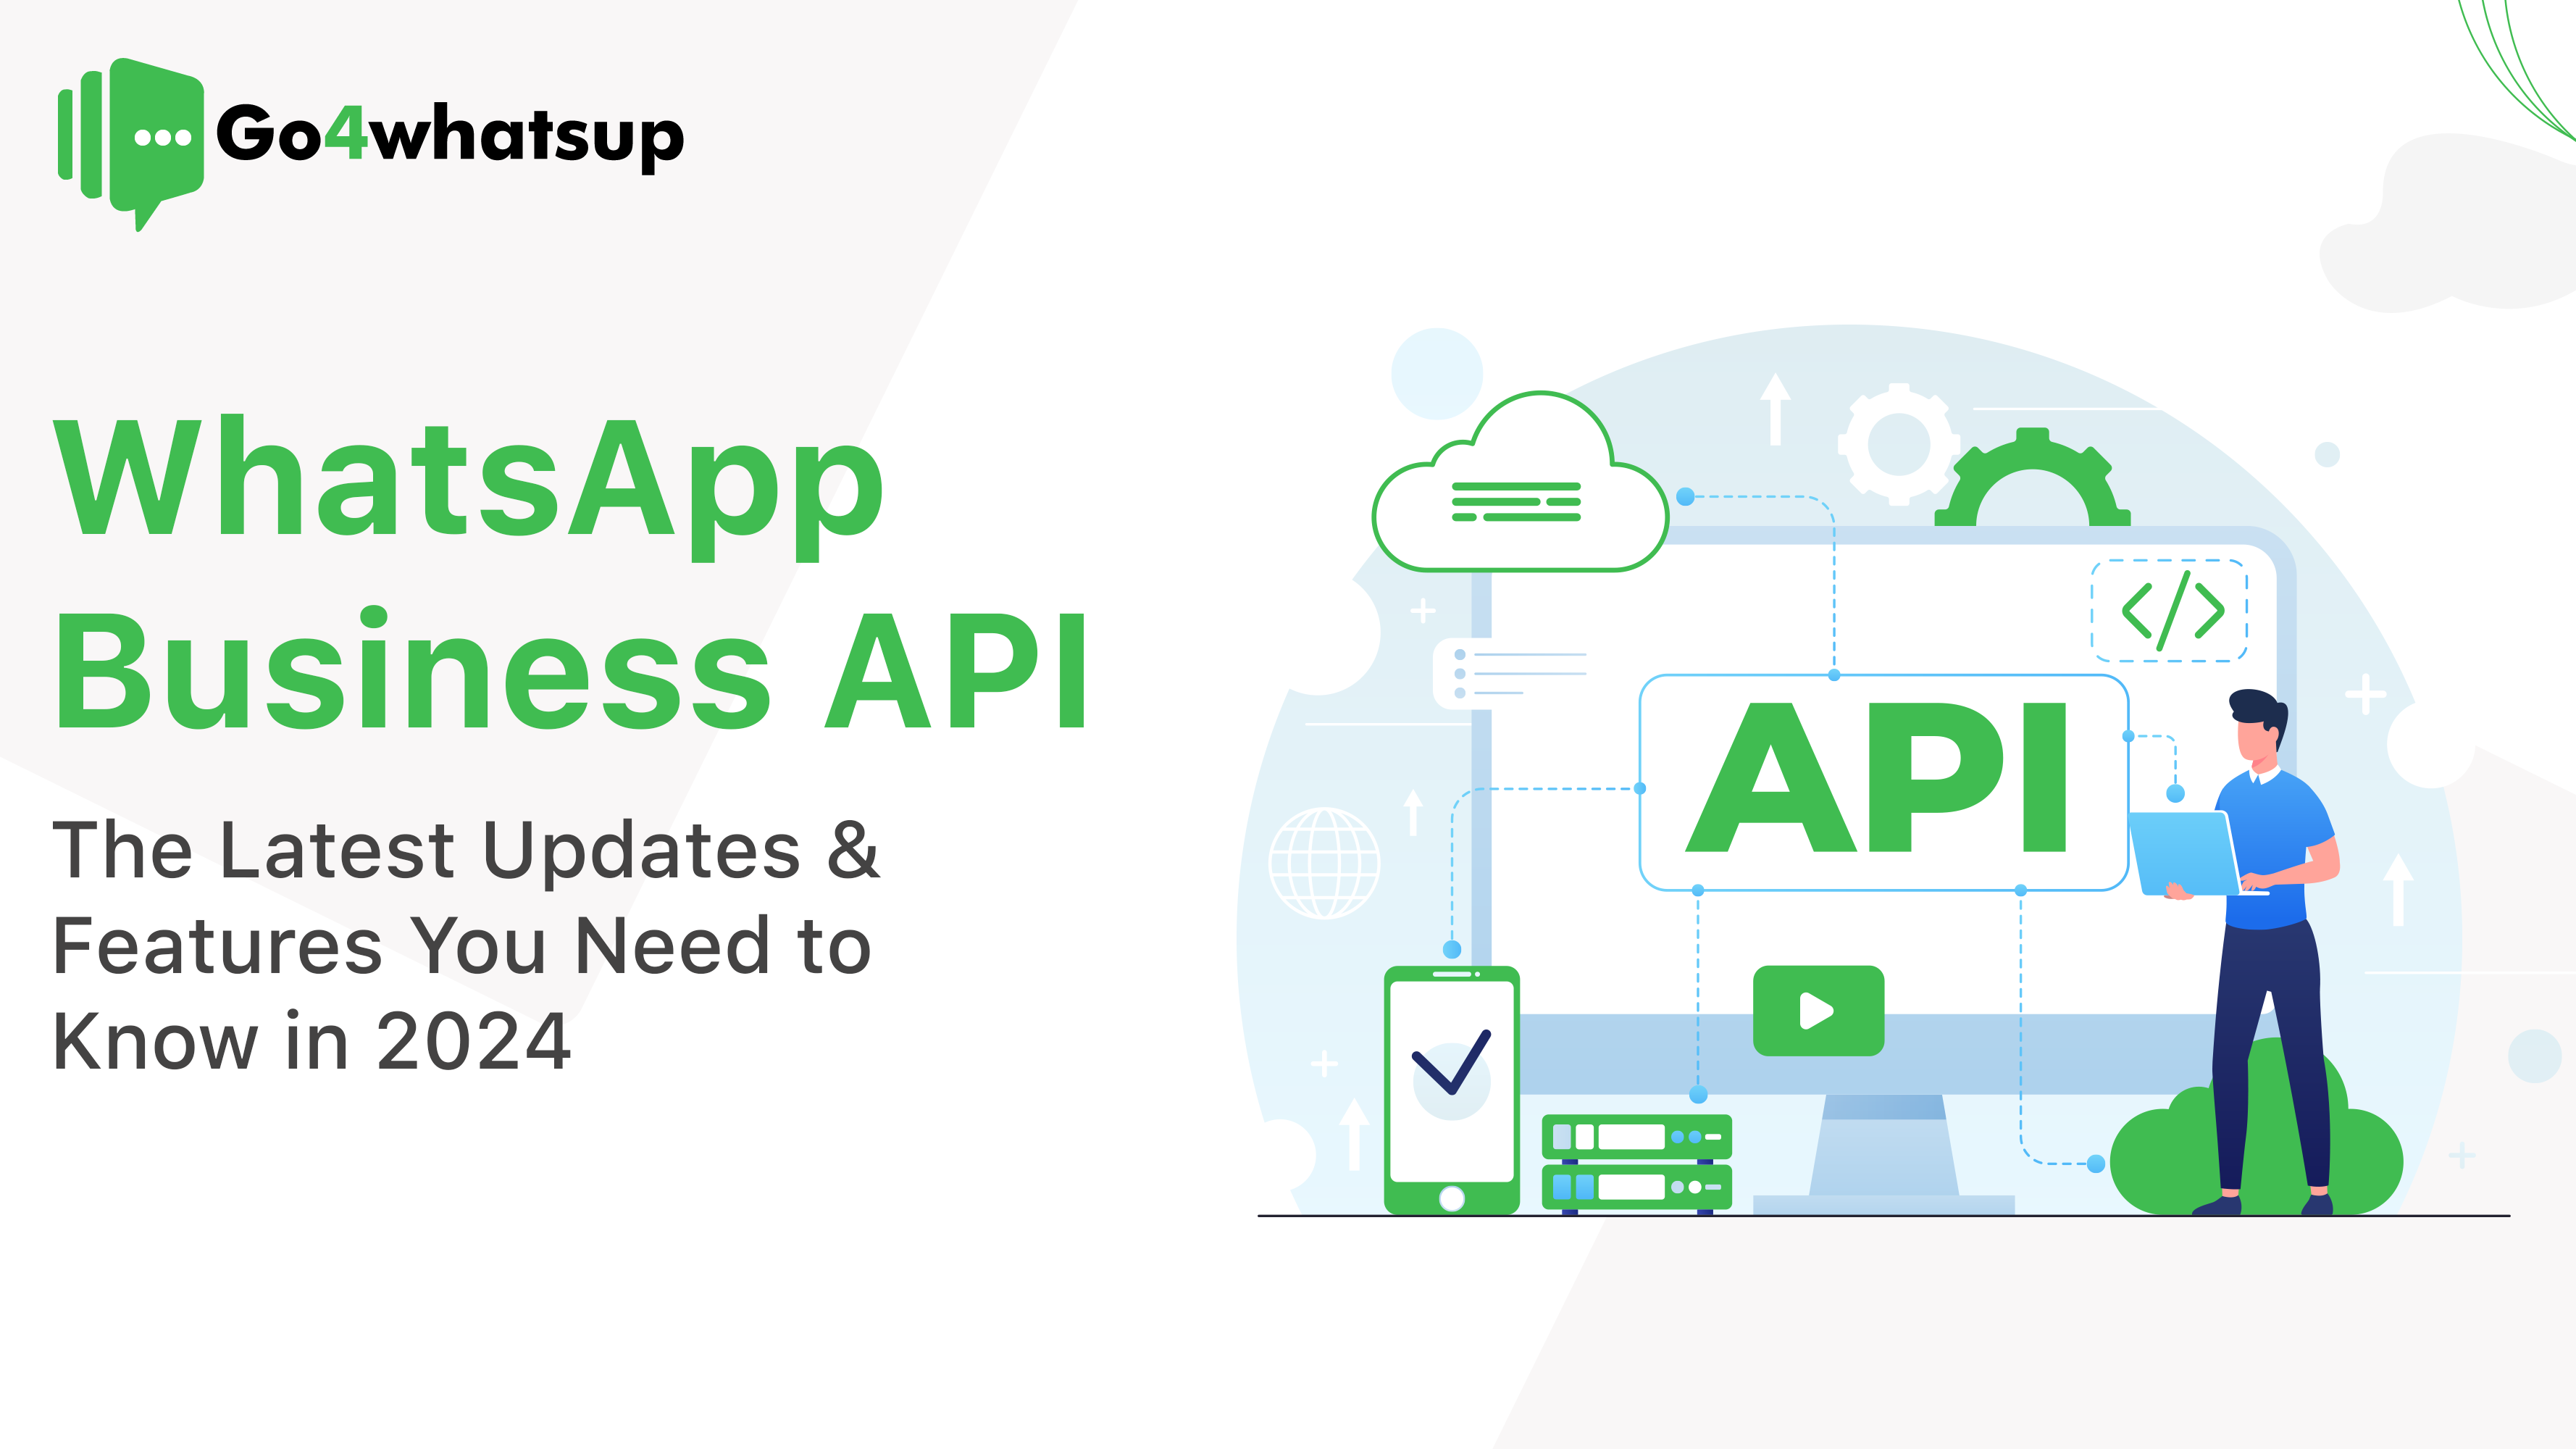 WhatsApp Business API: Everything You Need To Know